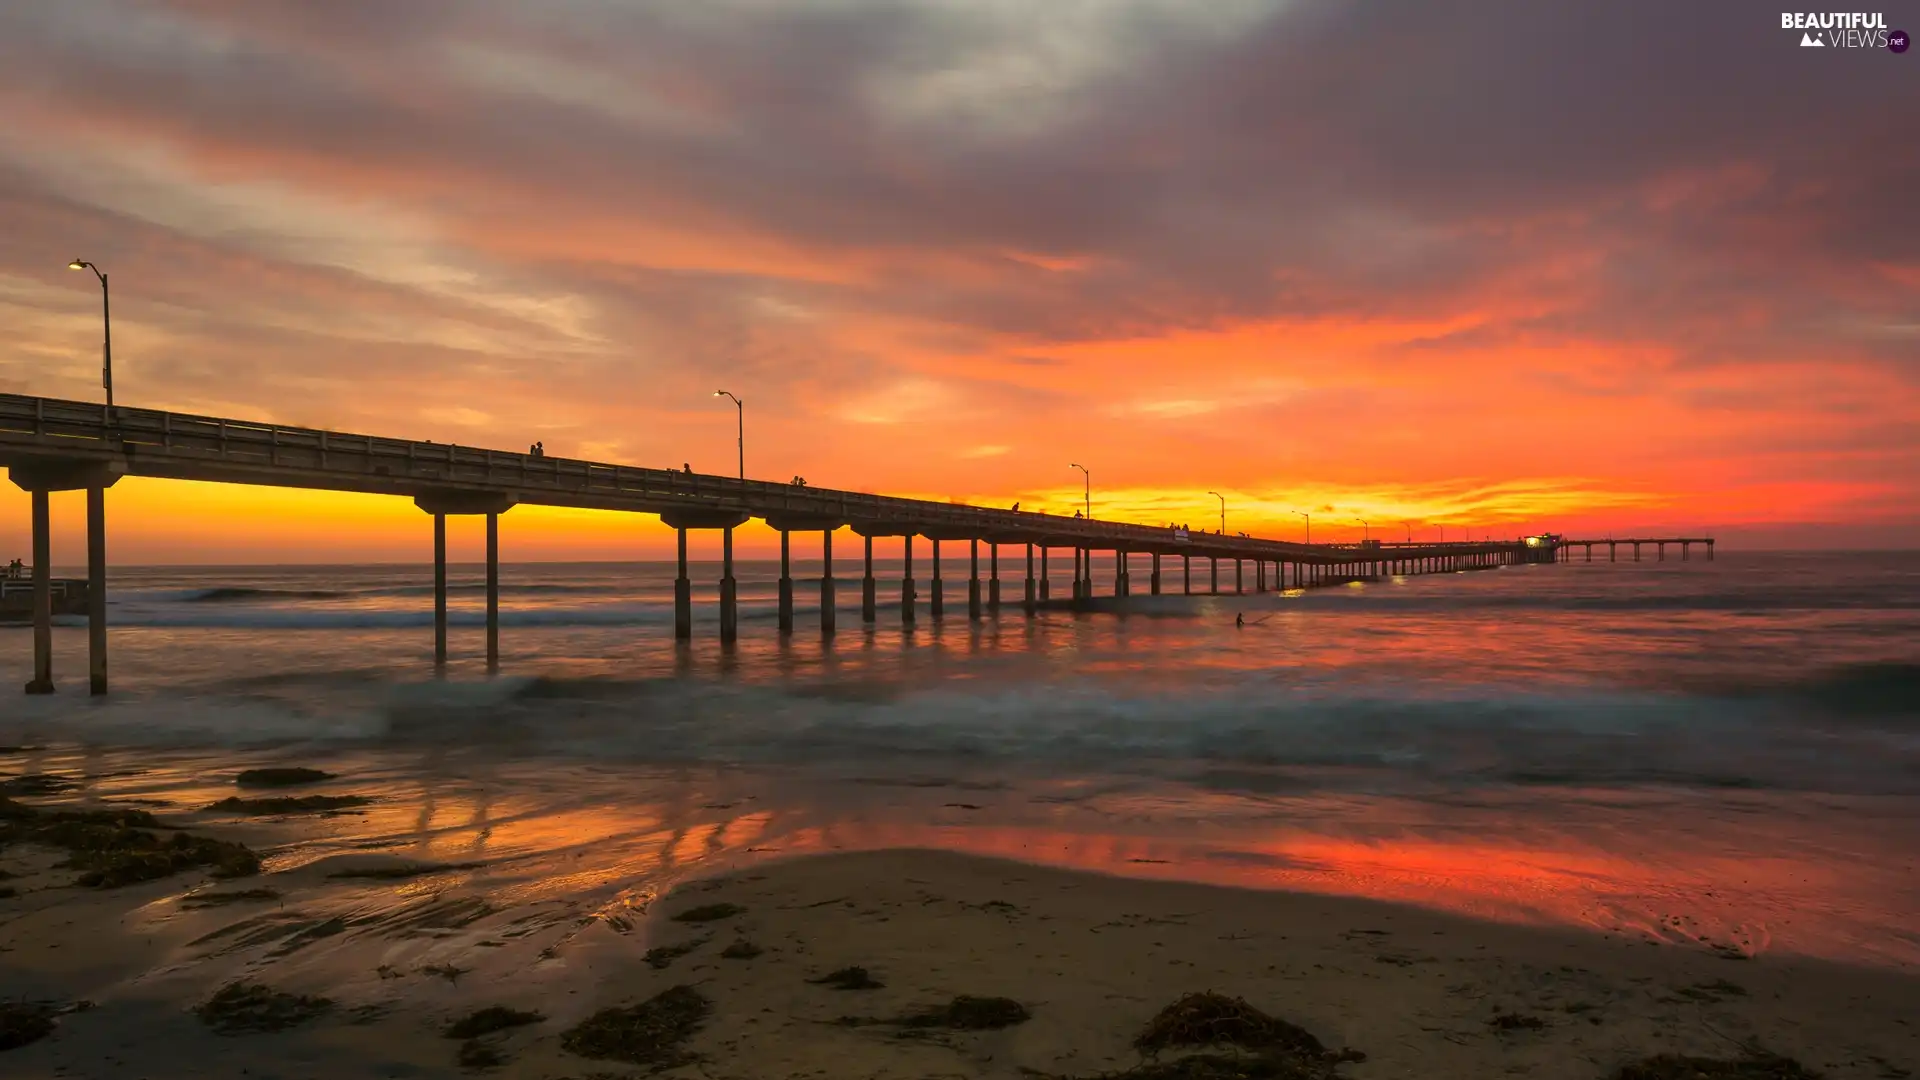 Great Sunsets, sea, color, Sky, clouds, pier